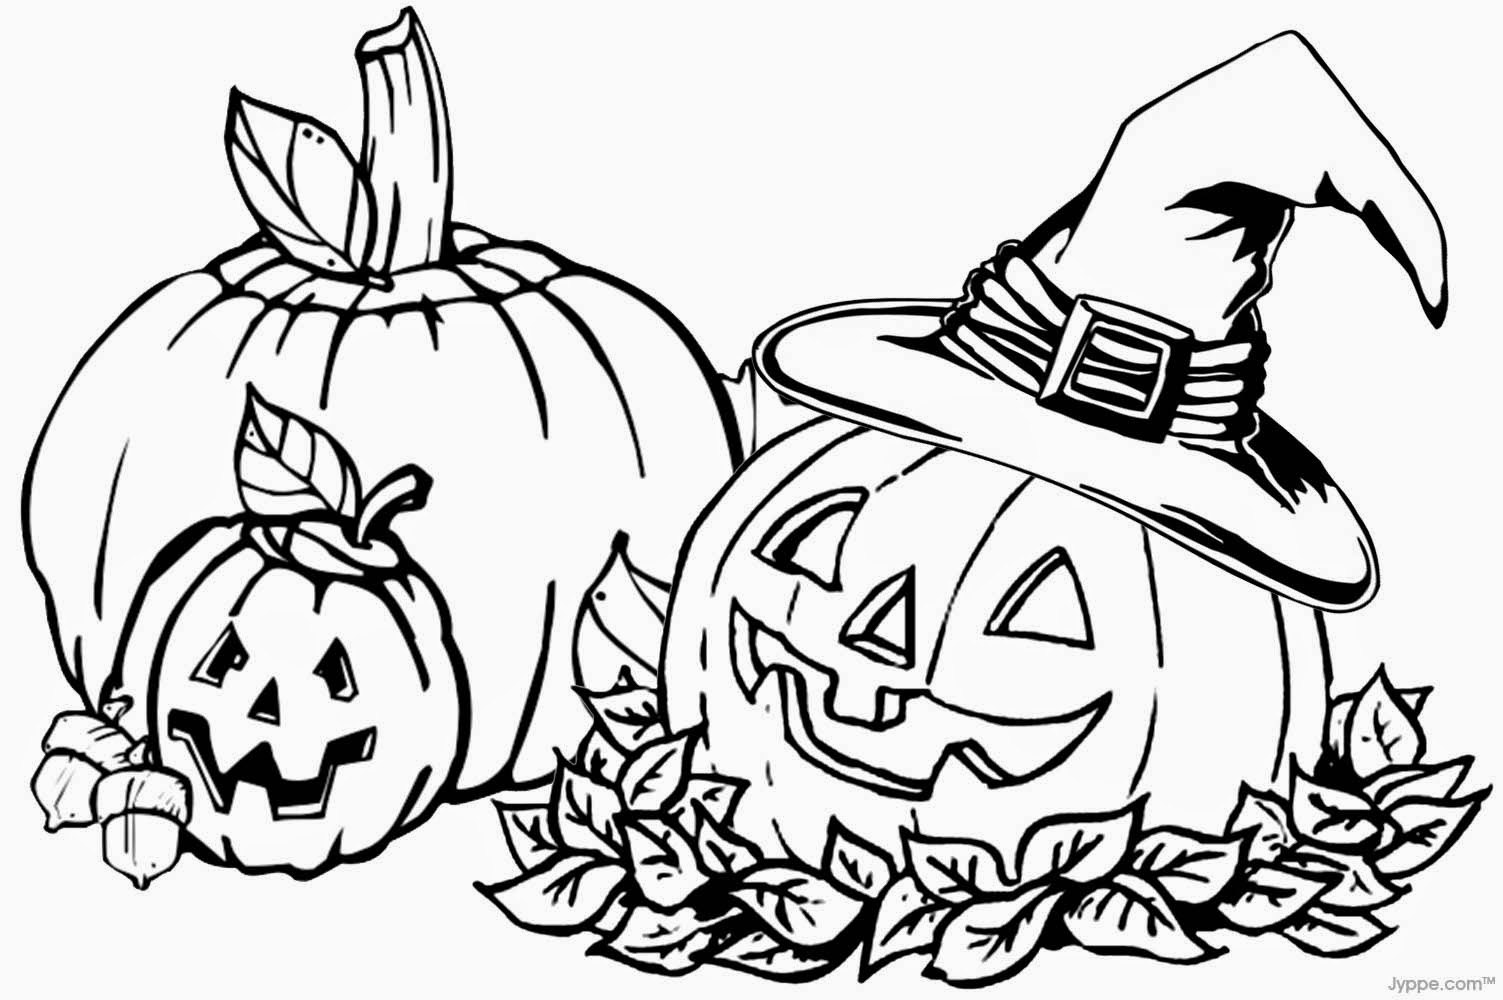 Download Free Halloween Jack-o'-Lantern Coloring Pages